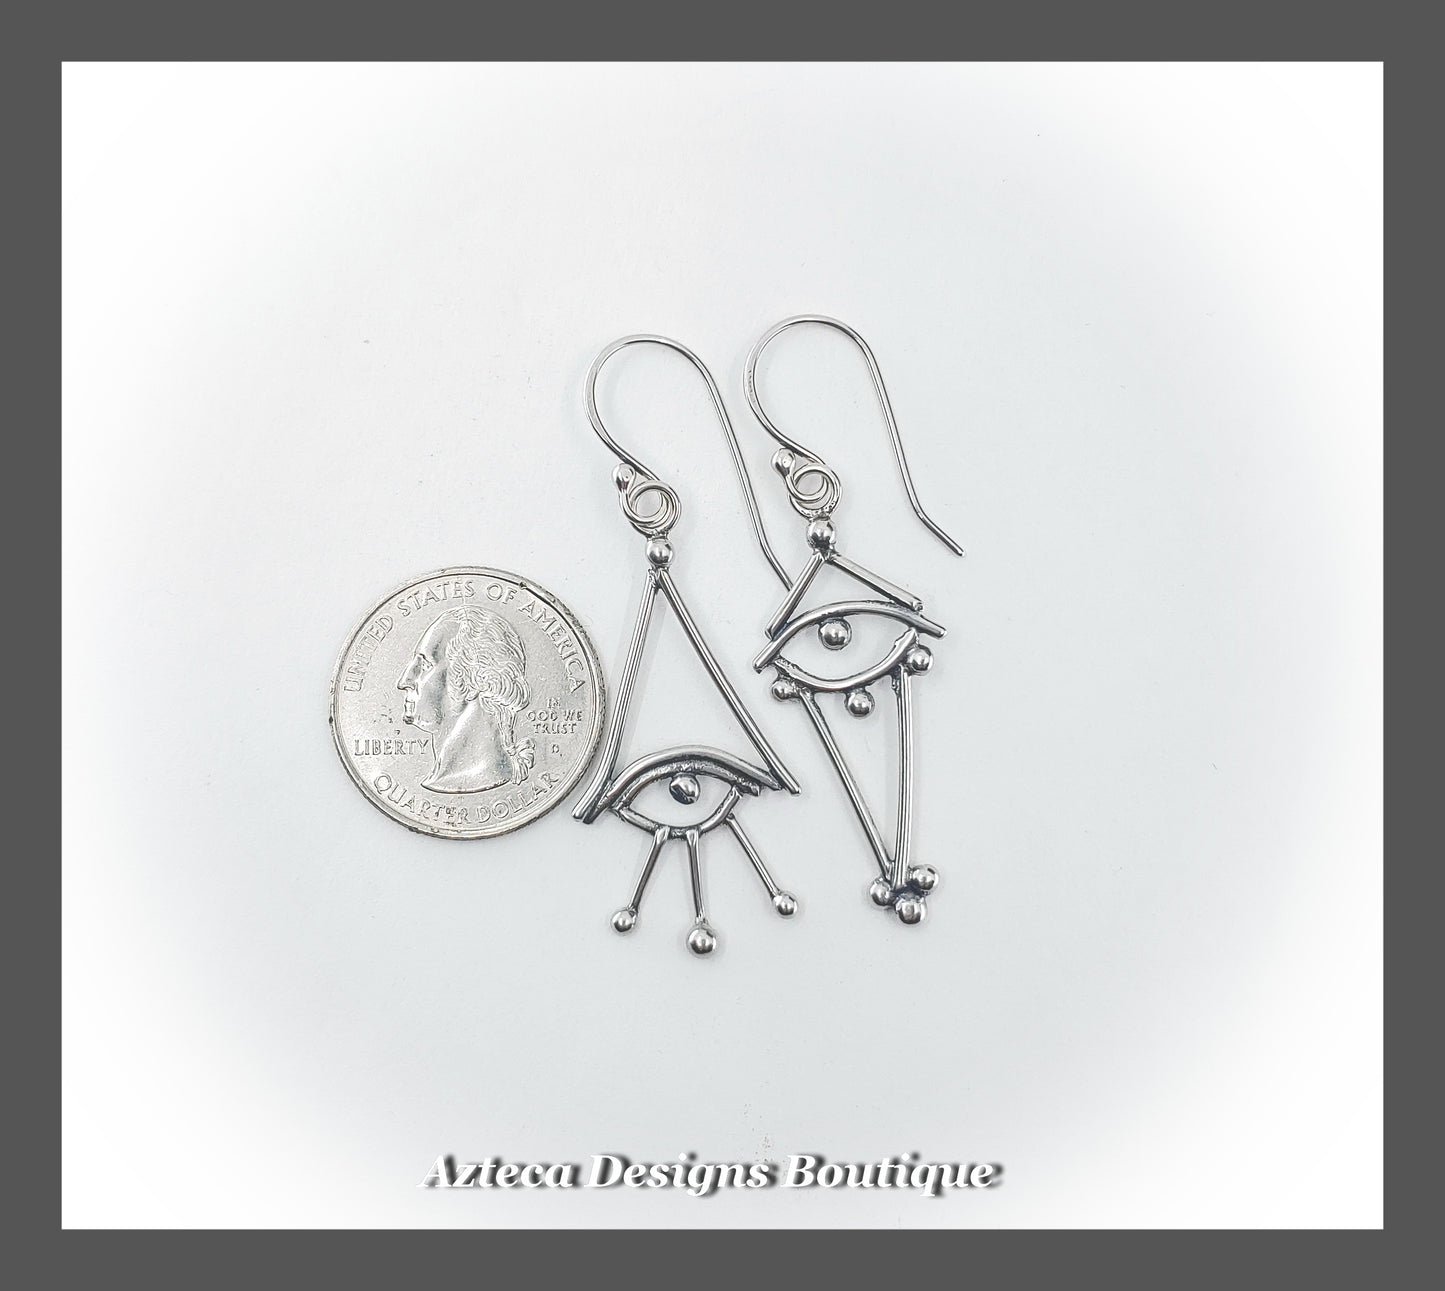 Protect + Argentium Silver Hand Fabricated Earrings